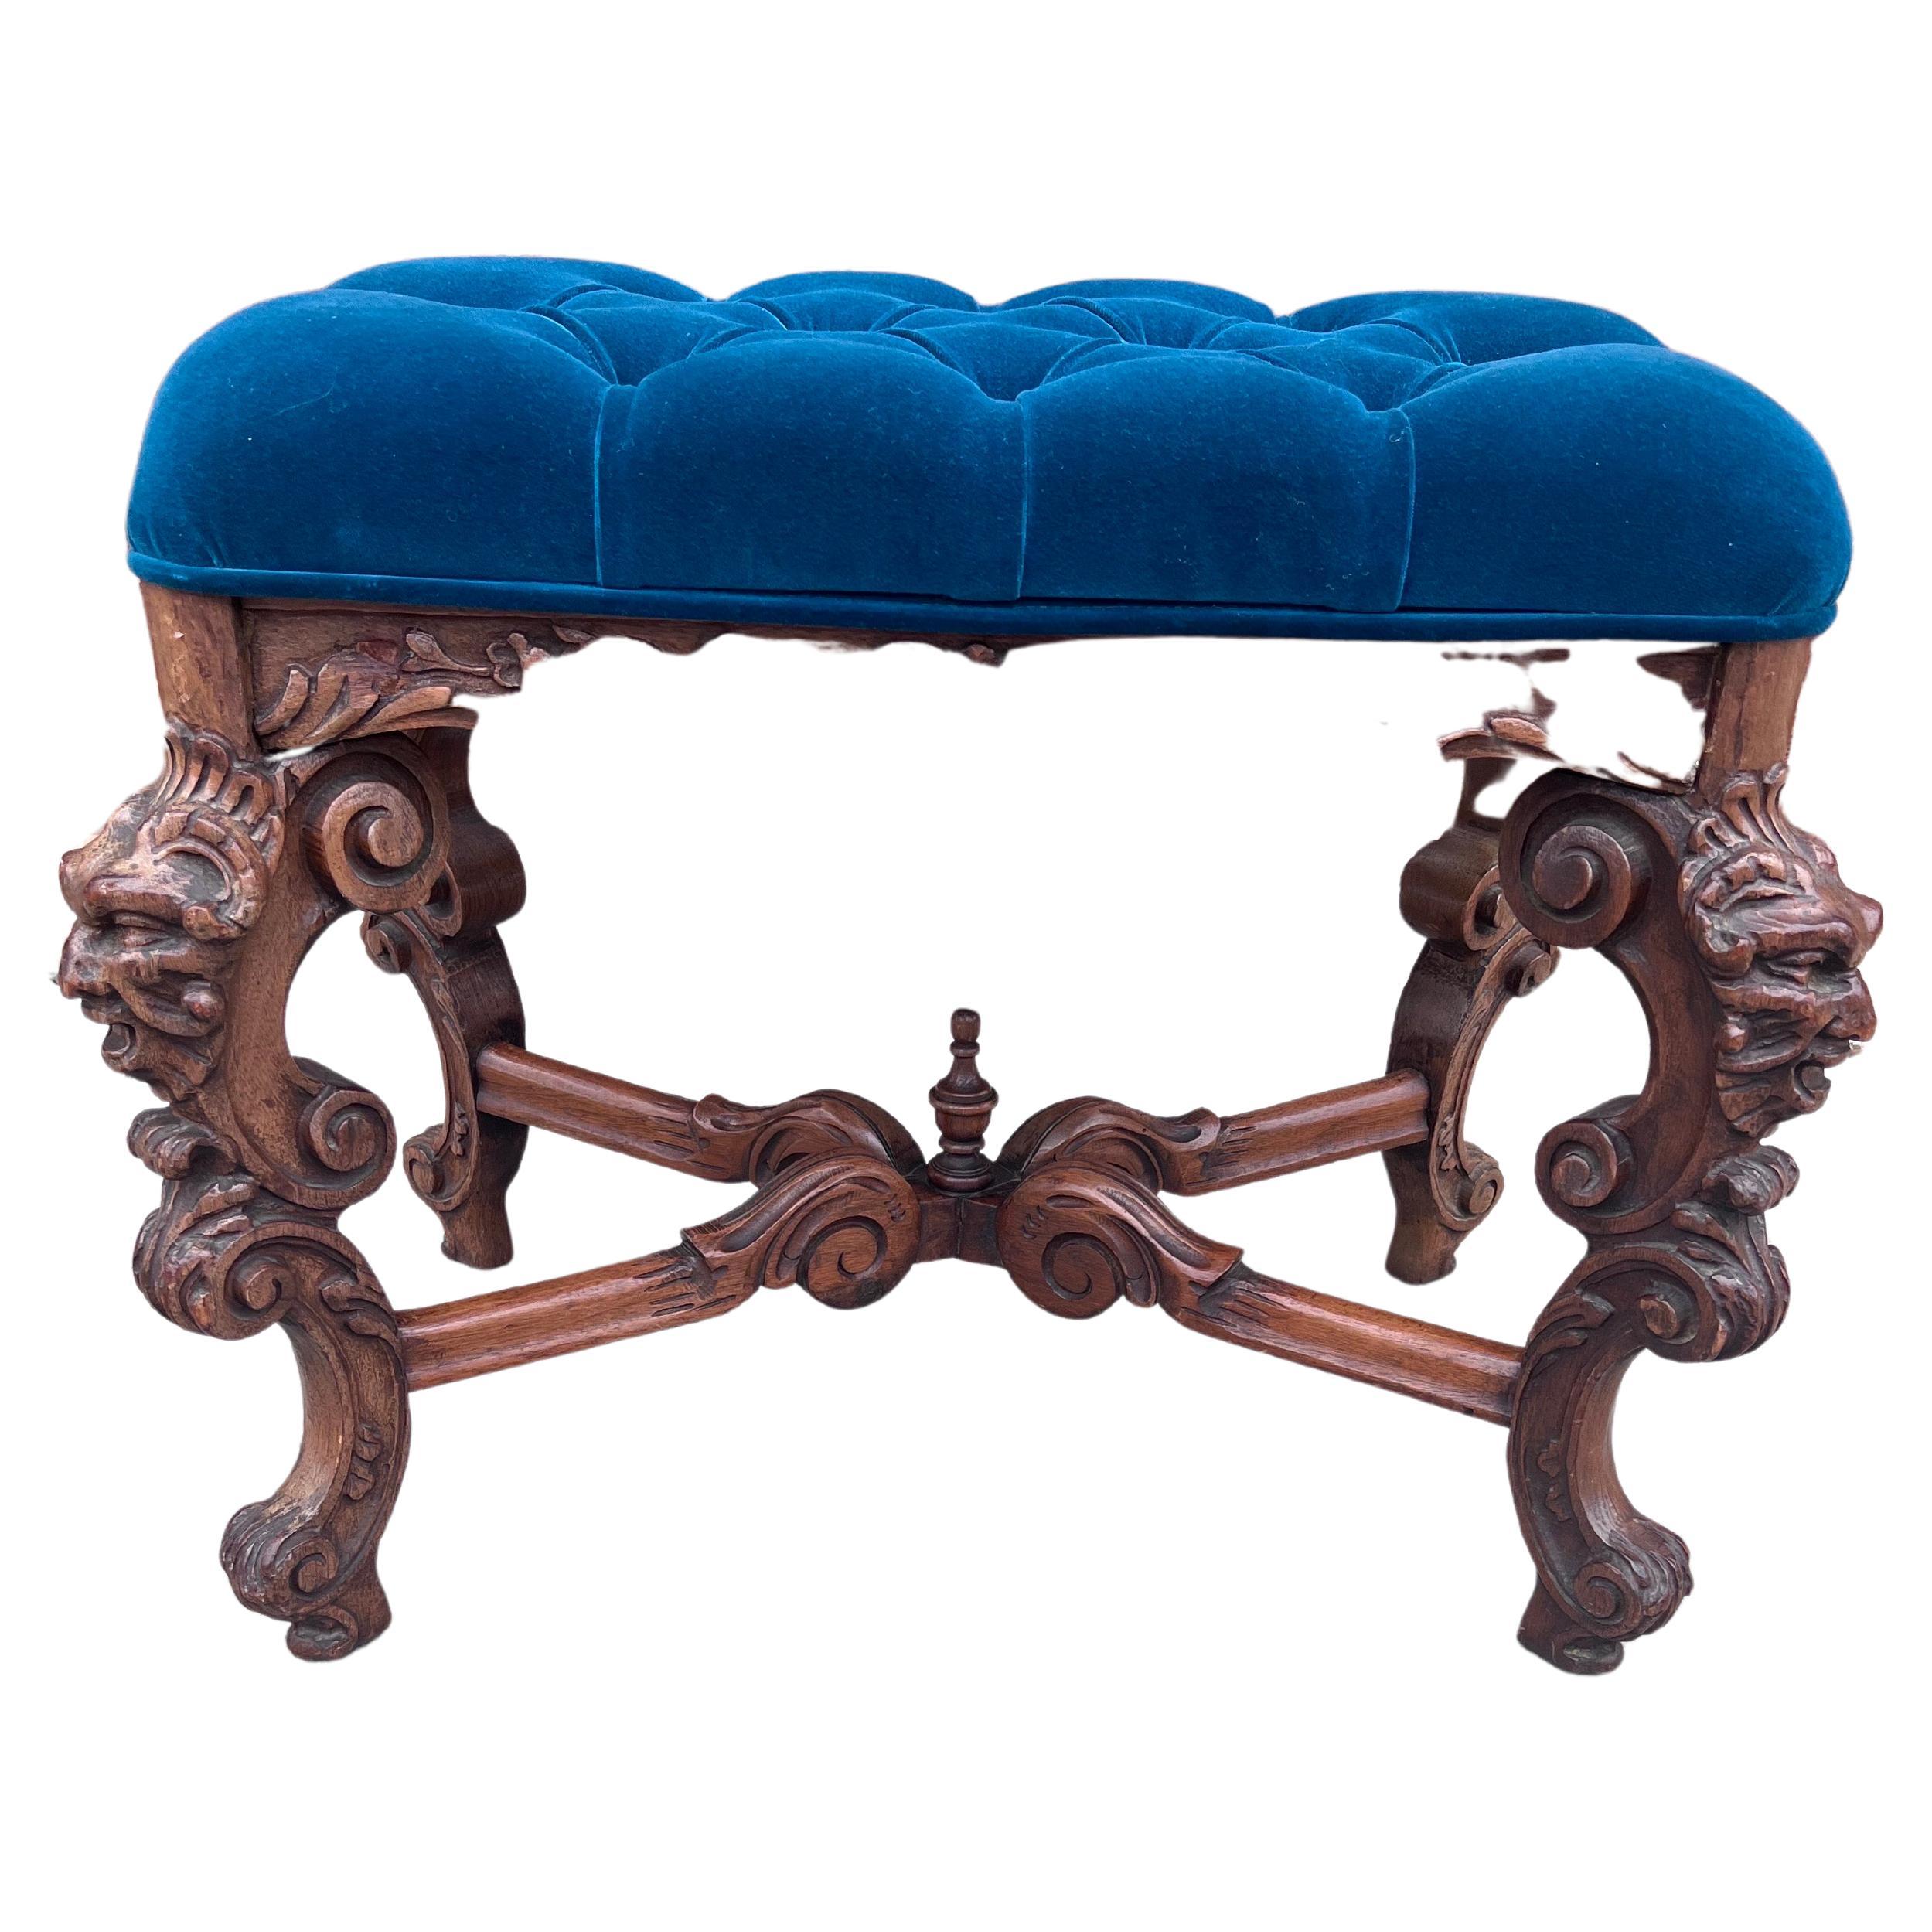 Antique Gothic Style Ornate Griffin Carved Ottoman Newly Upholstered in a High End Blue Velvet

Super cool antique ornate ottoman with a newly upholstered tufted blue velvet pillow top. The ottoman has griffin faces carved on all 4 legs. 

Circa